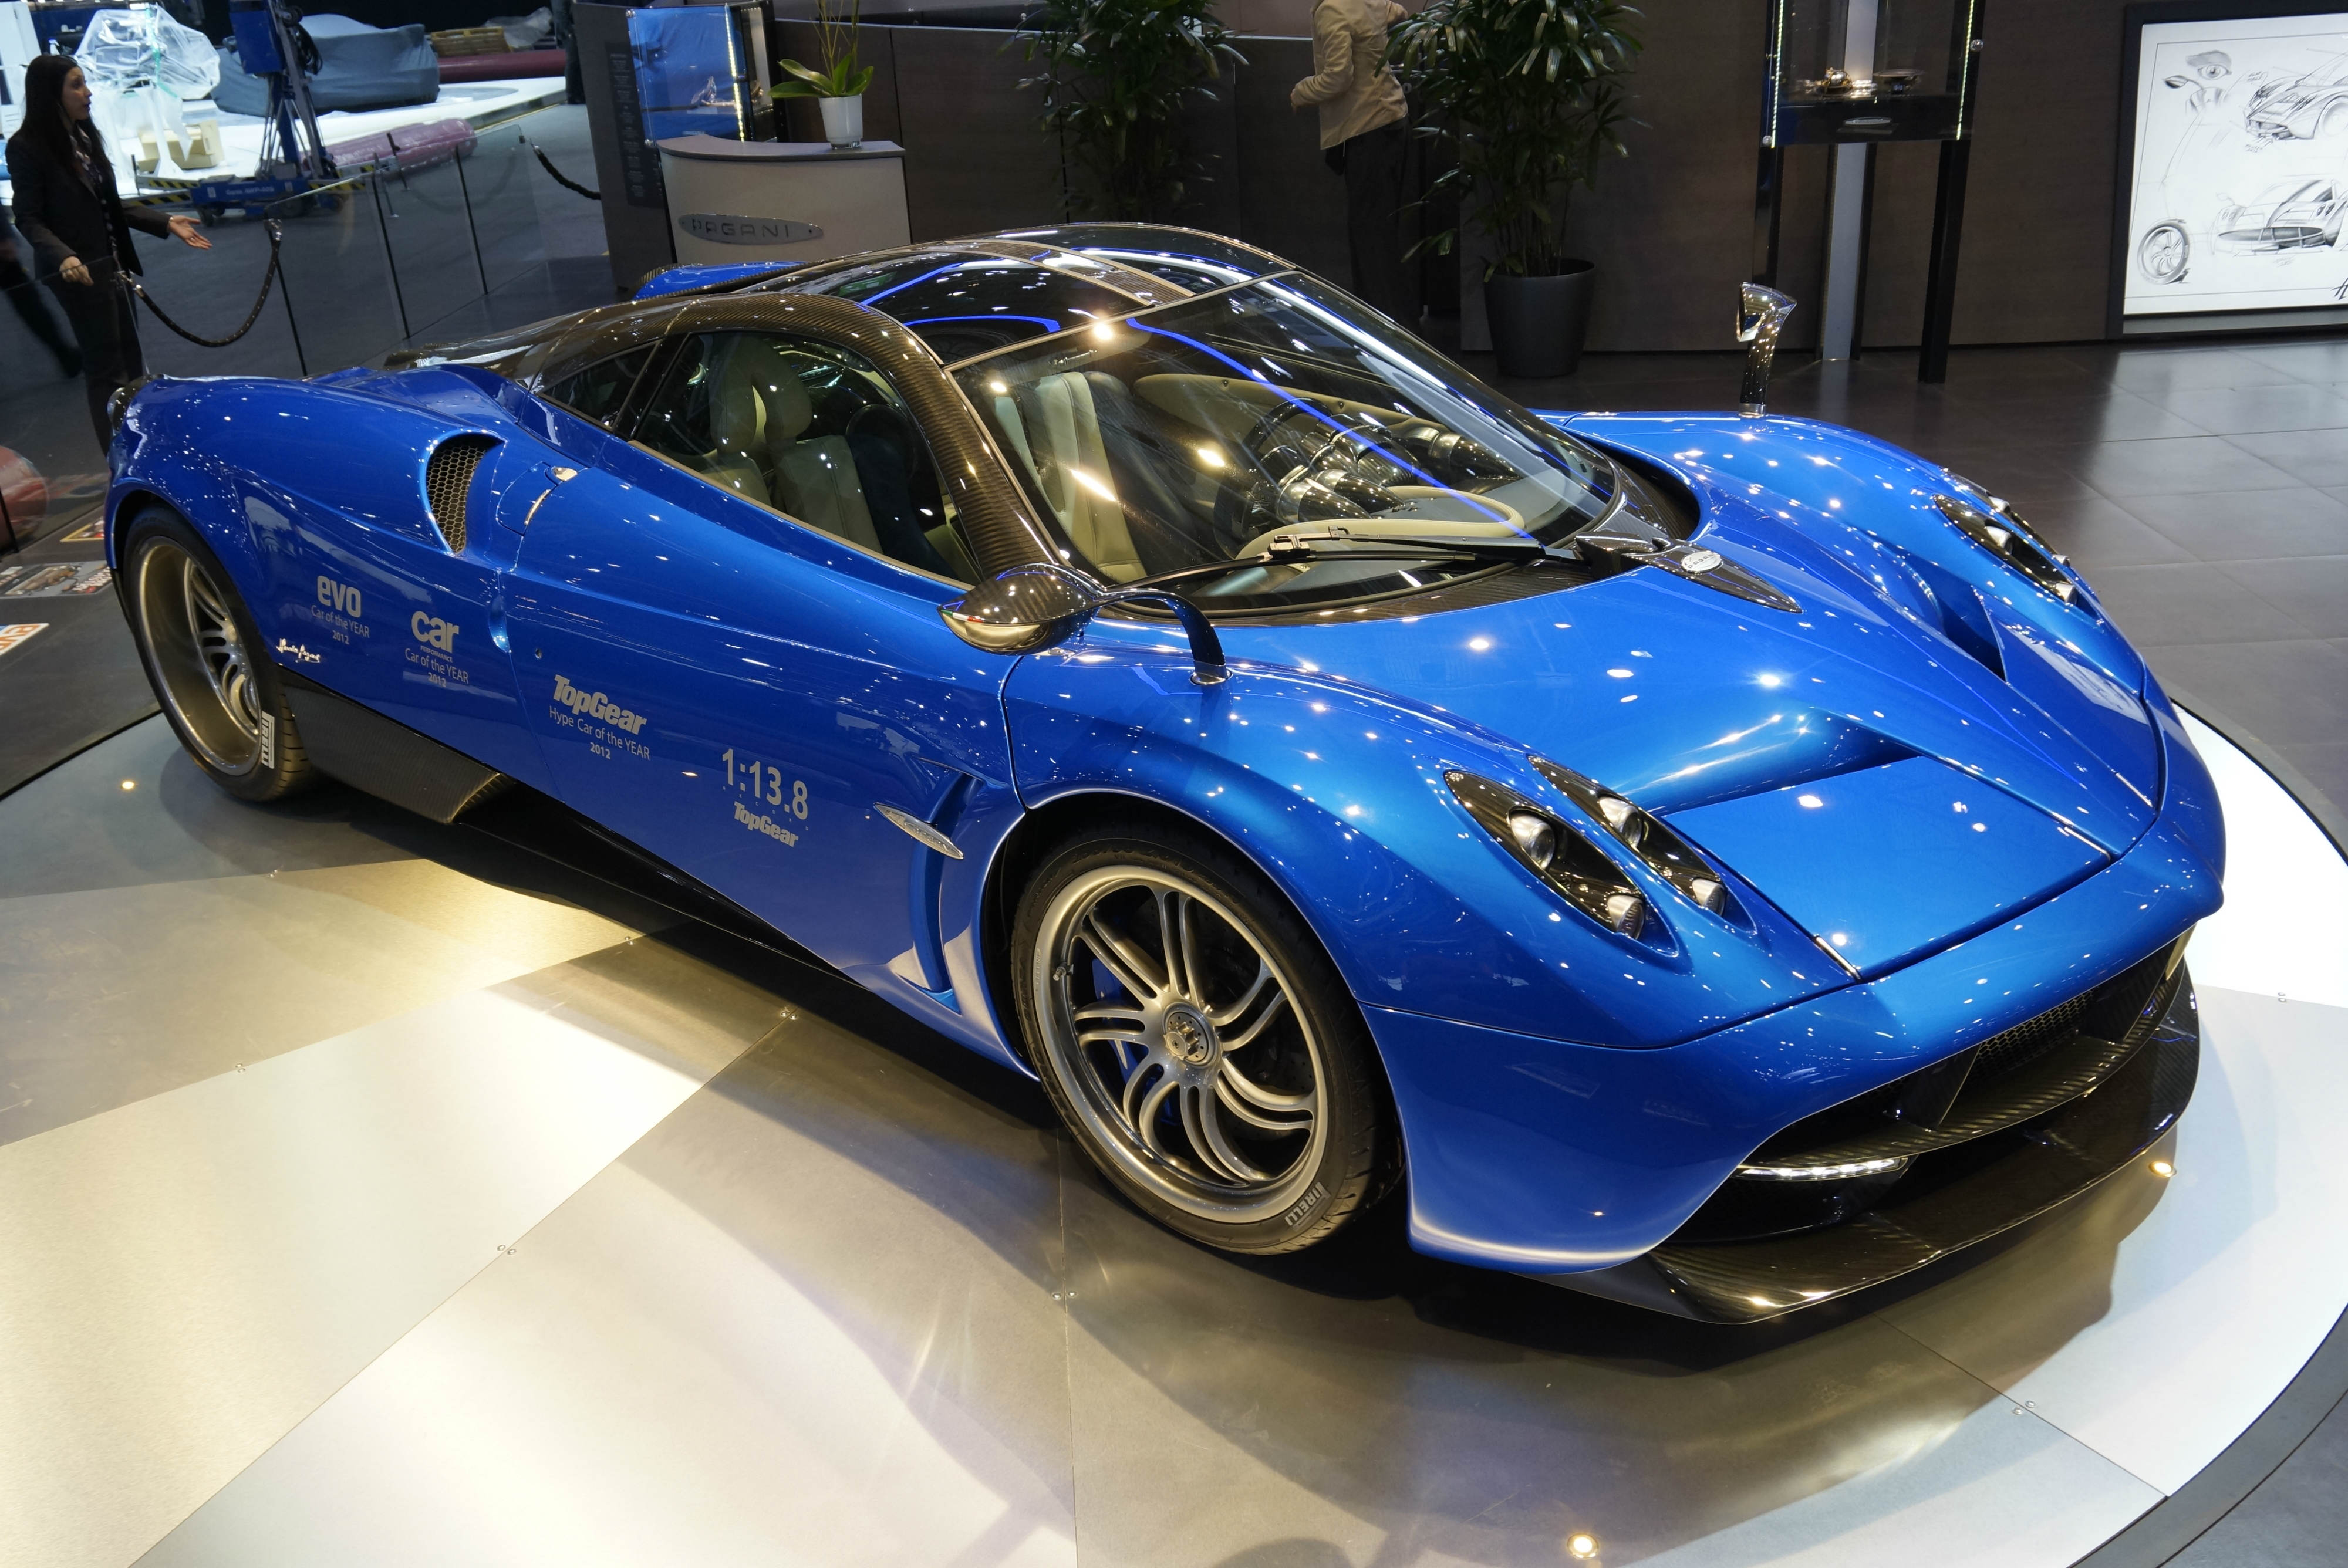 Optional carbon fibre body adds nearly £100,000 to cost of Pagani Huayra